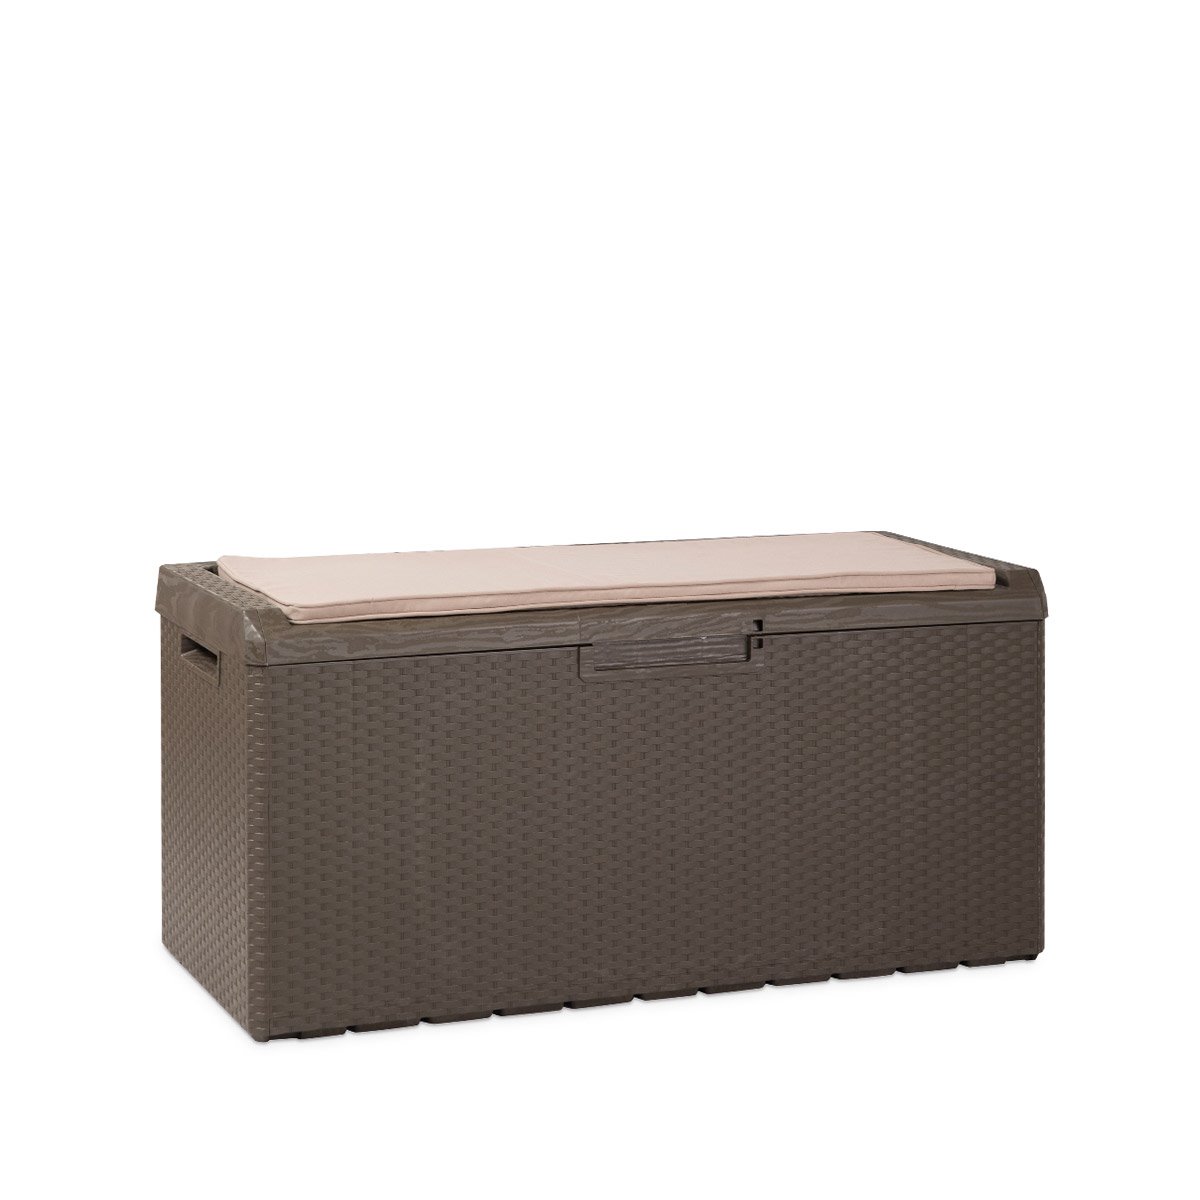 Anthracite Toomax Z599E197 Foreverspring UV Weather Resistant Lockable Box Chest Bench for Outdoor Pool Patio Furniture and Deck Storage Bin 70 Gallon 